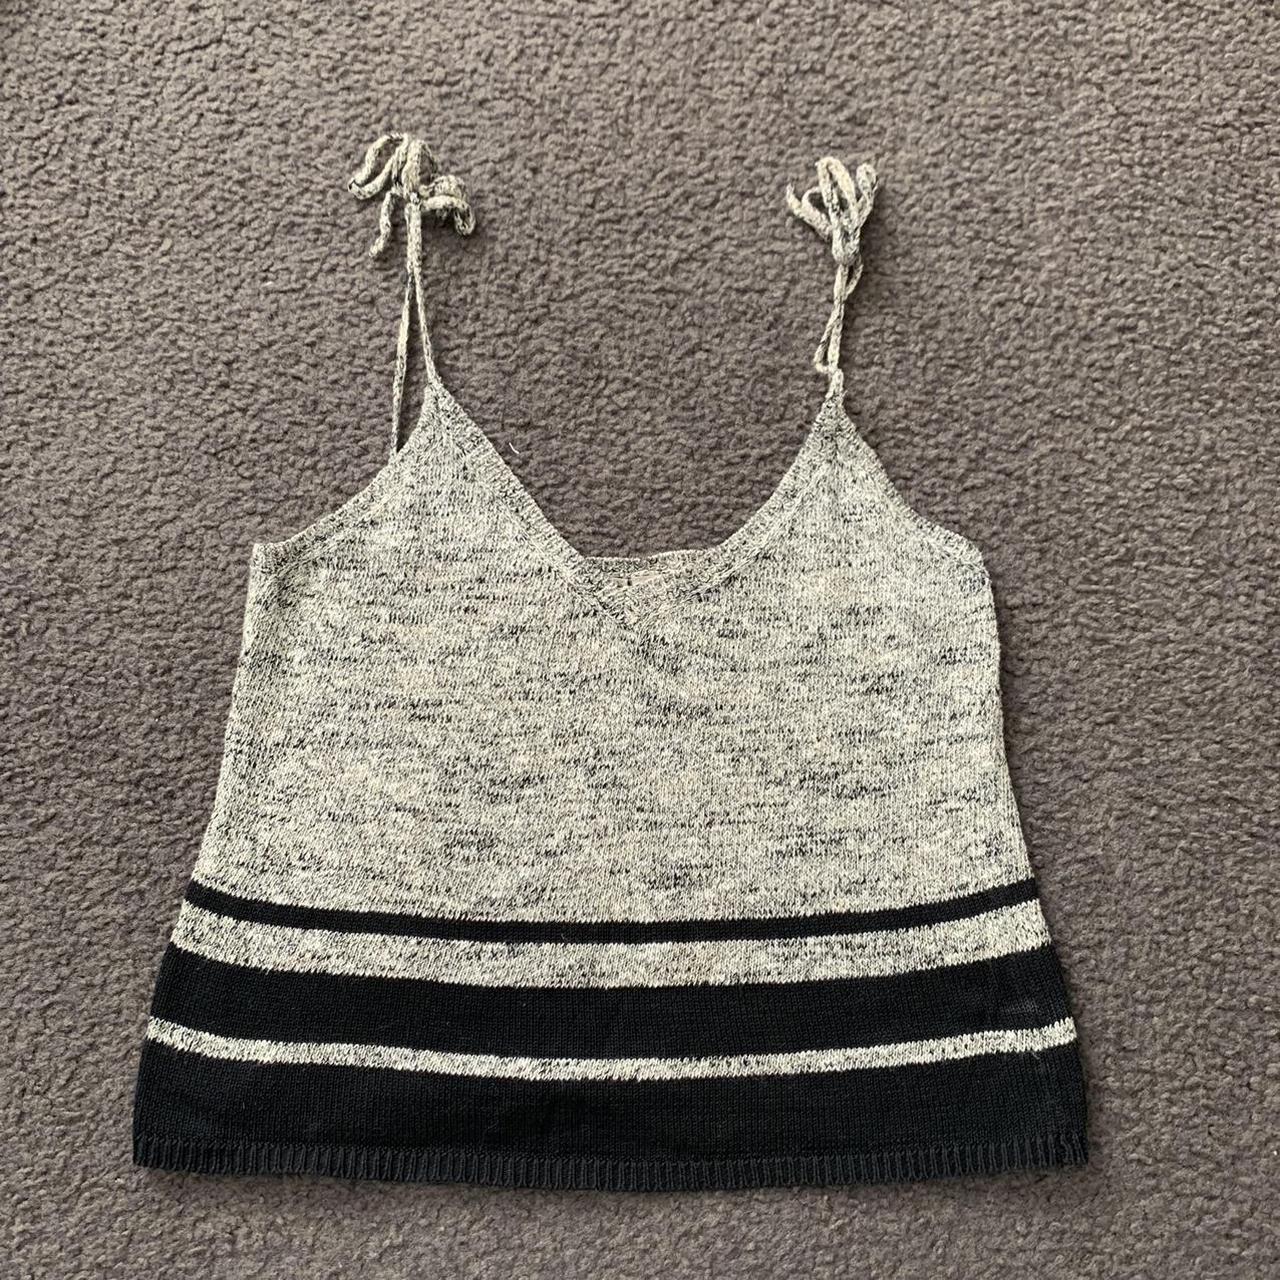 Product Image 4 - 🖤 Knit Crop Top 🖤

Size